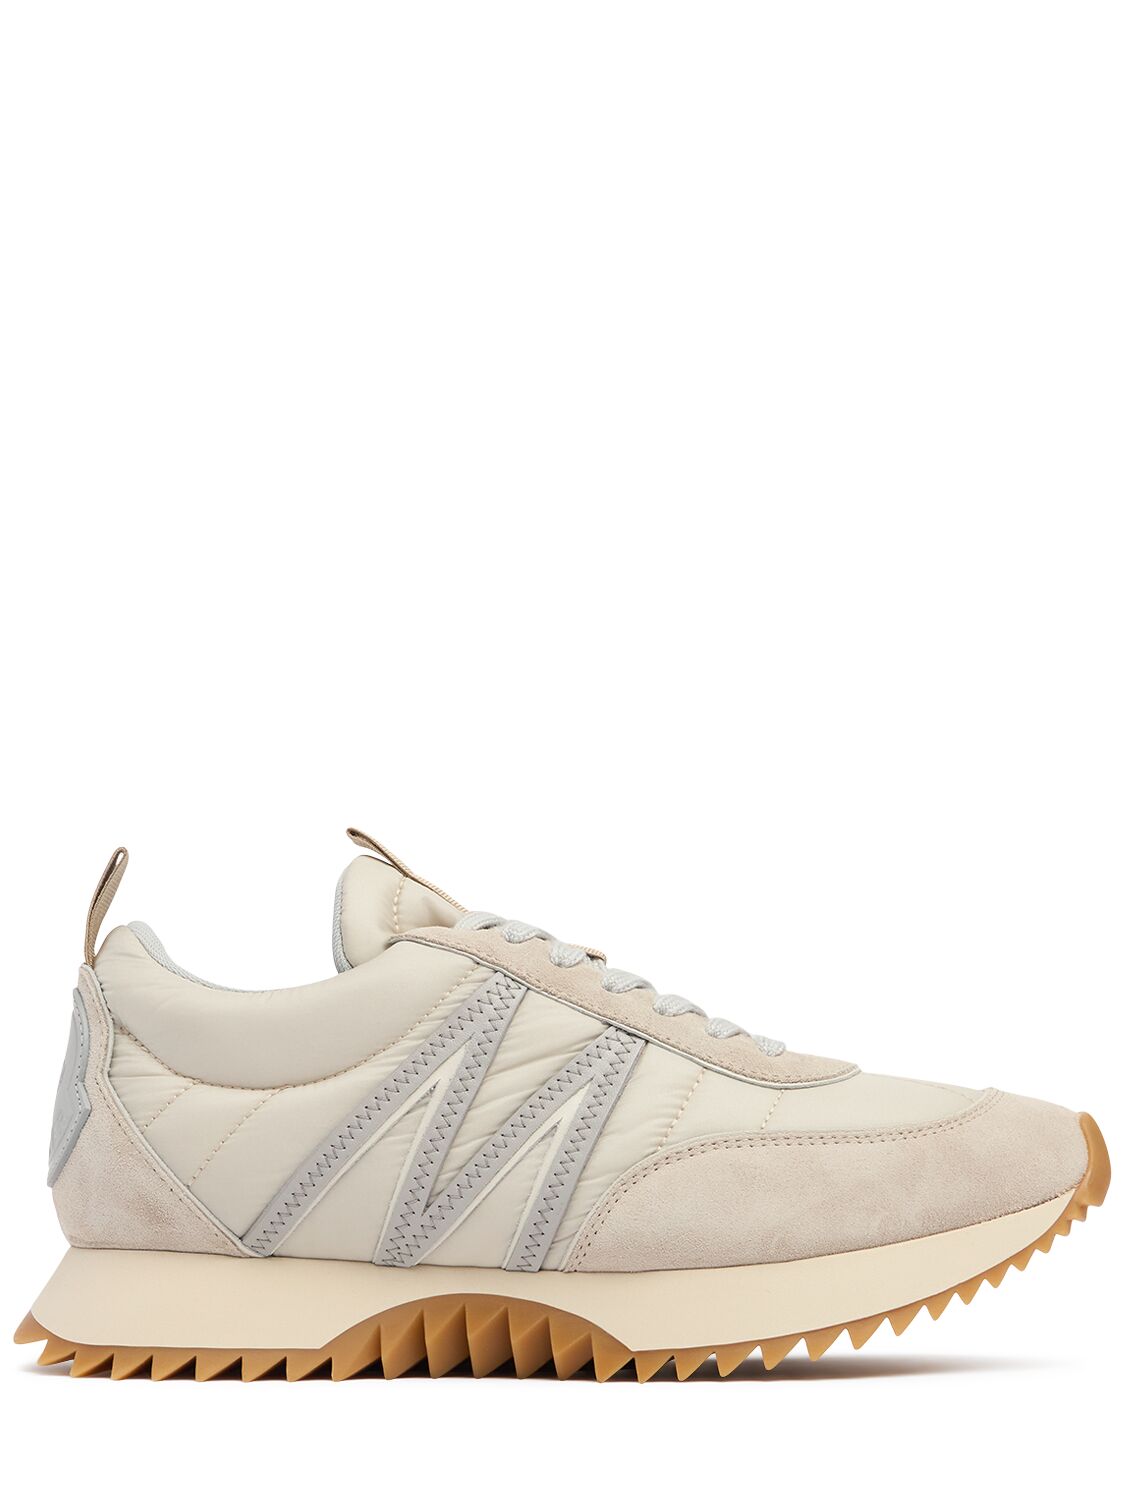 Moncler 30mm Pacey Nylon Sneakers In Light Beige